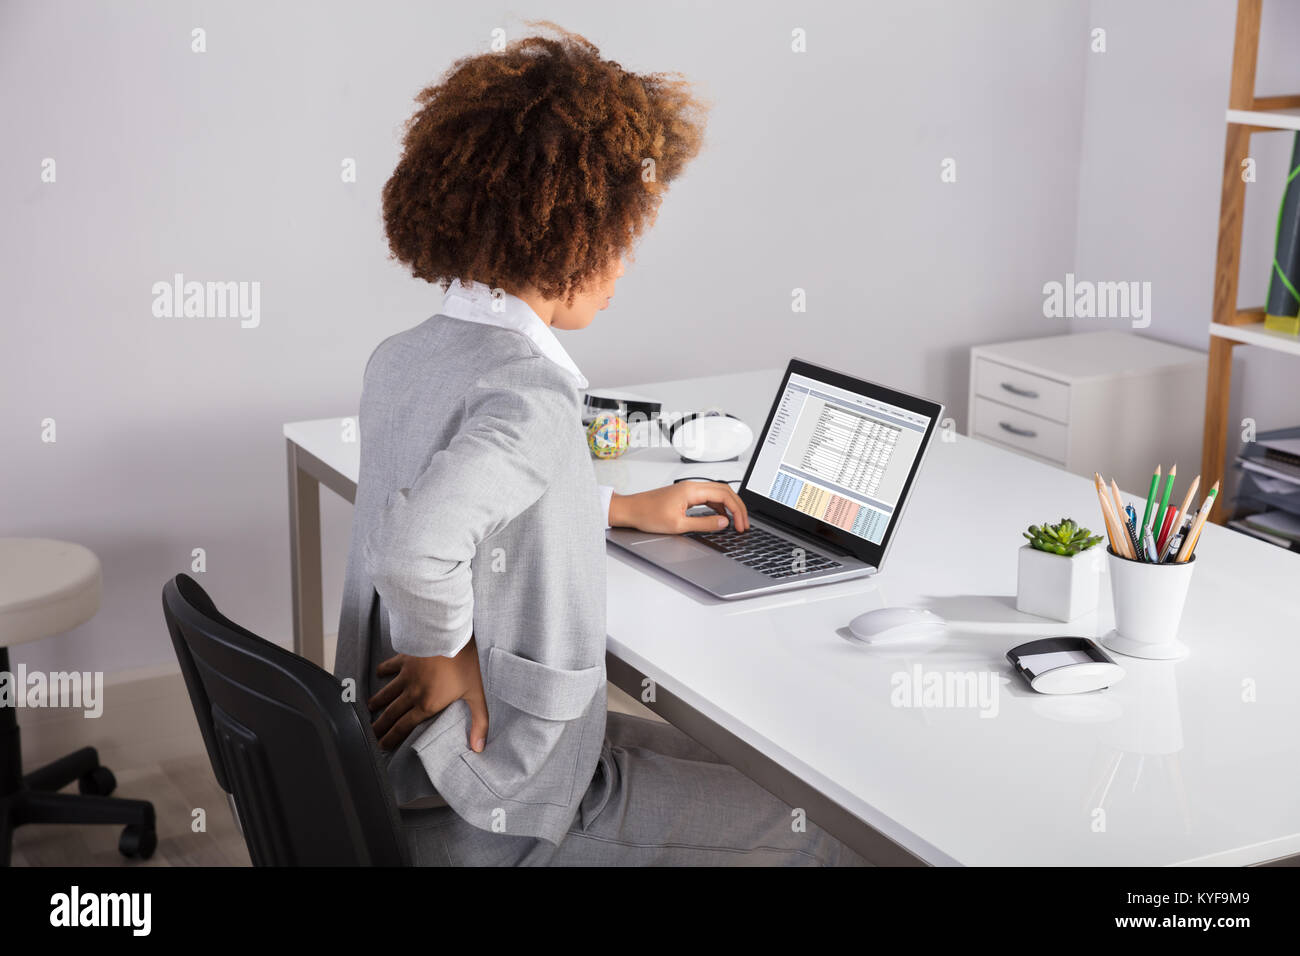 Businesswoman Holding Her Back While Working On Laptop At Office Desk Stock Photo